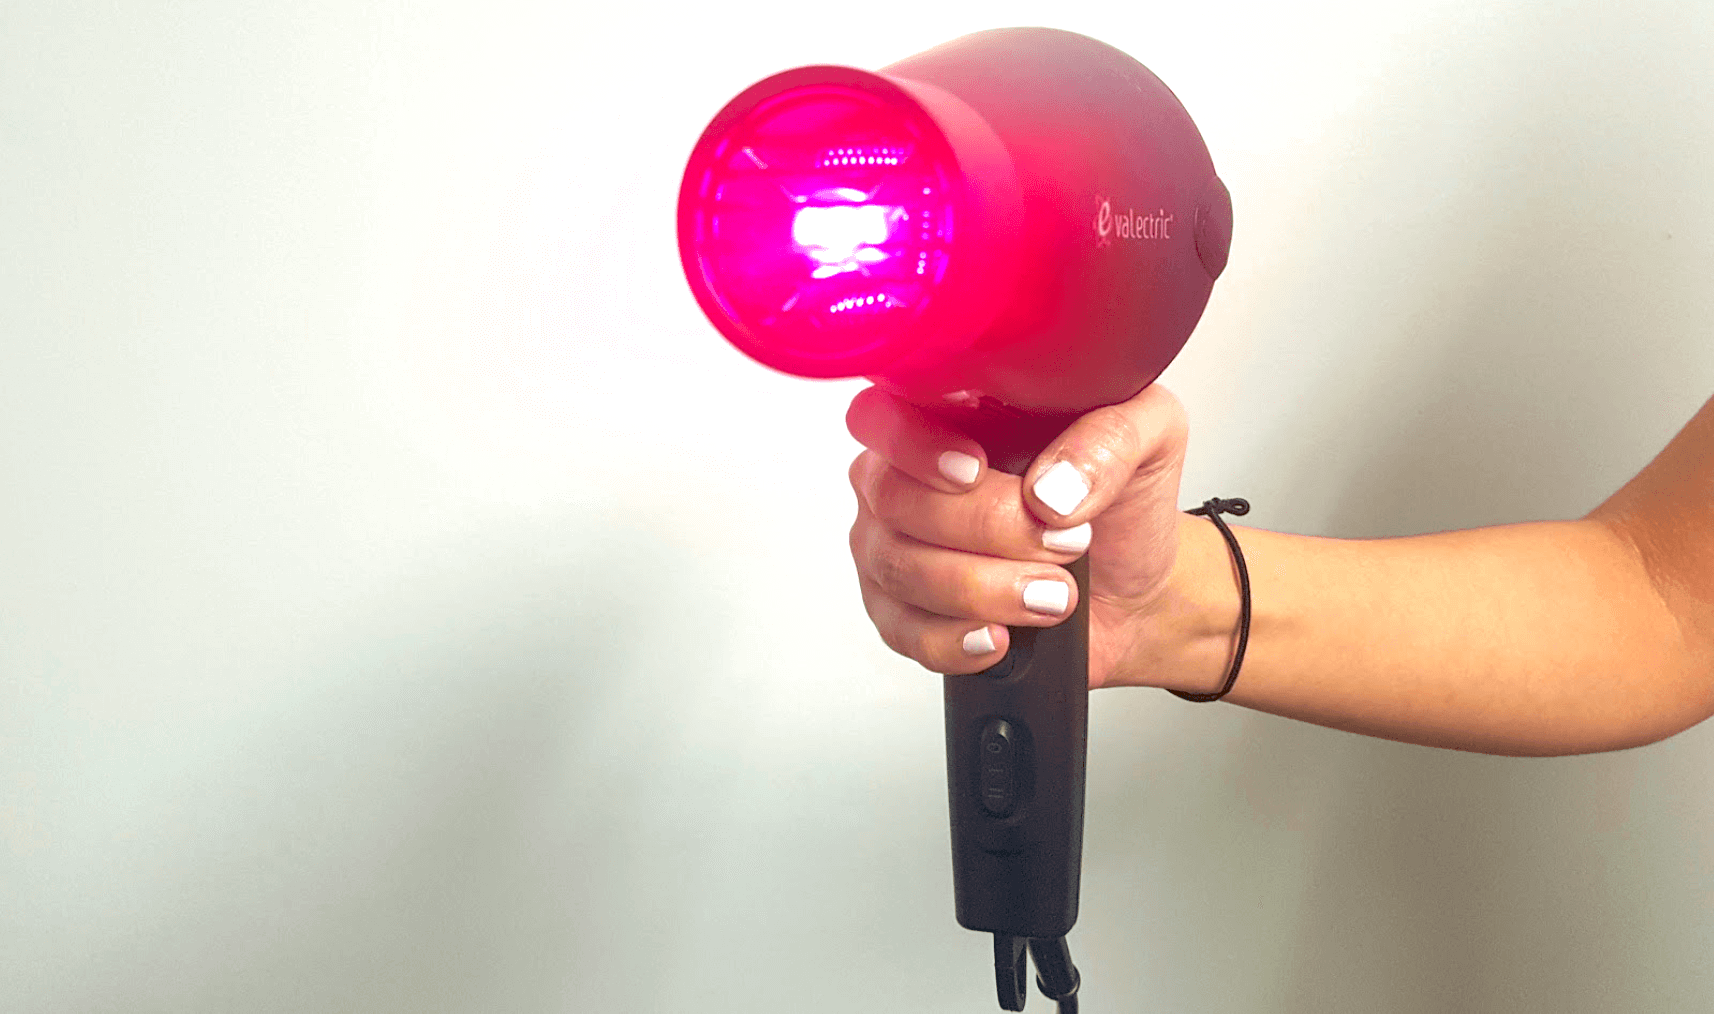 Evalectric Iconix LED Blow Dryer review